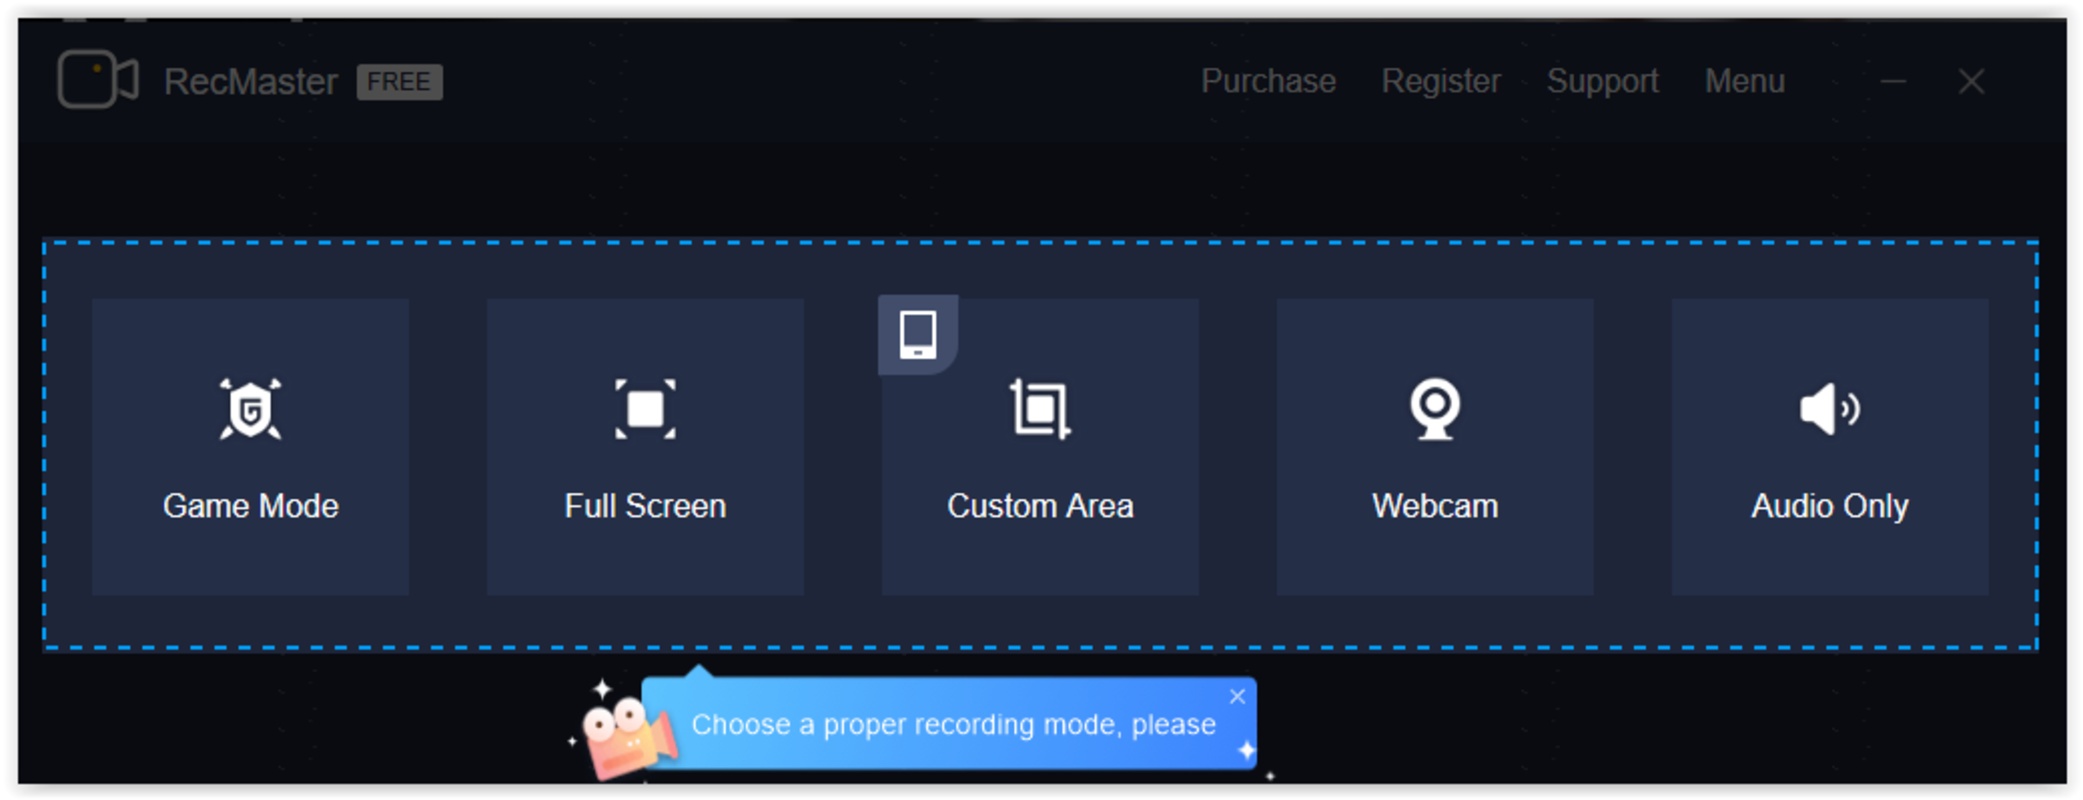 RecMaster Screen Recorder 2.2 feature